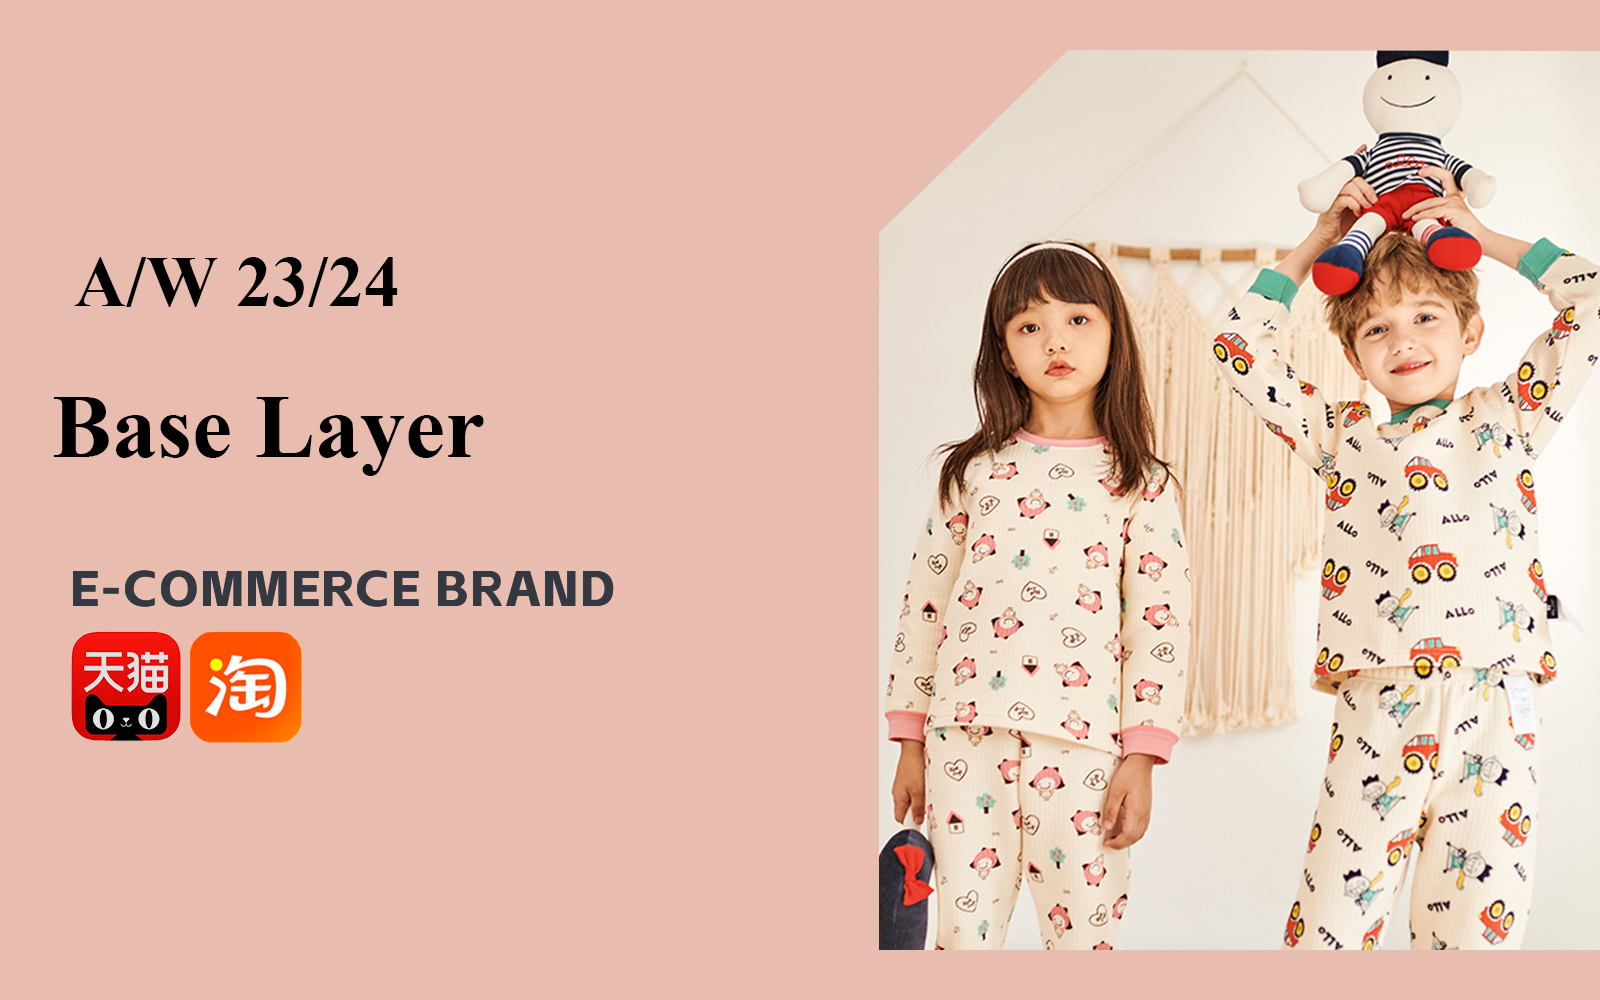 Base Layer -- The Comprehensive Analysis of Kidswear E-Commerce Brand